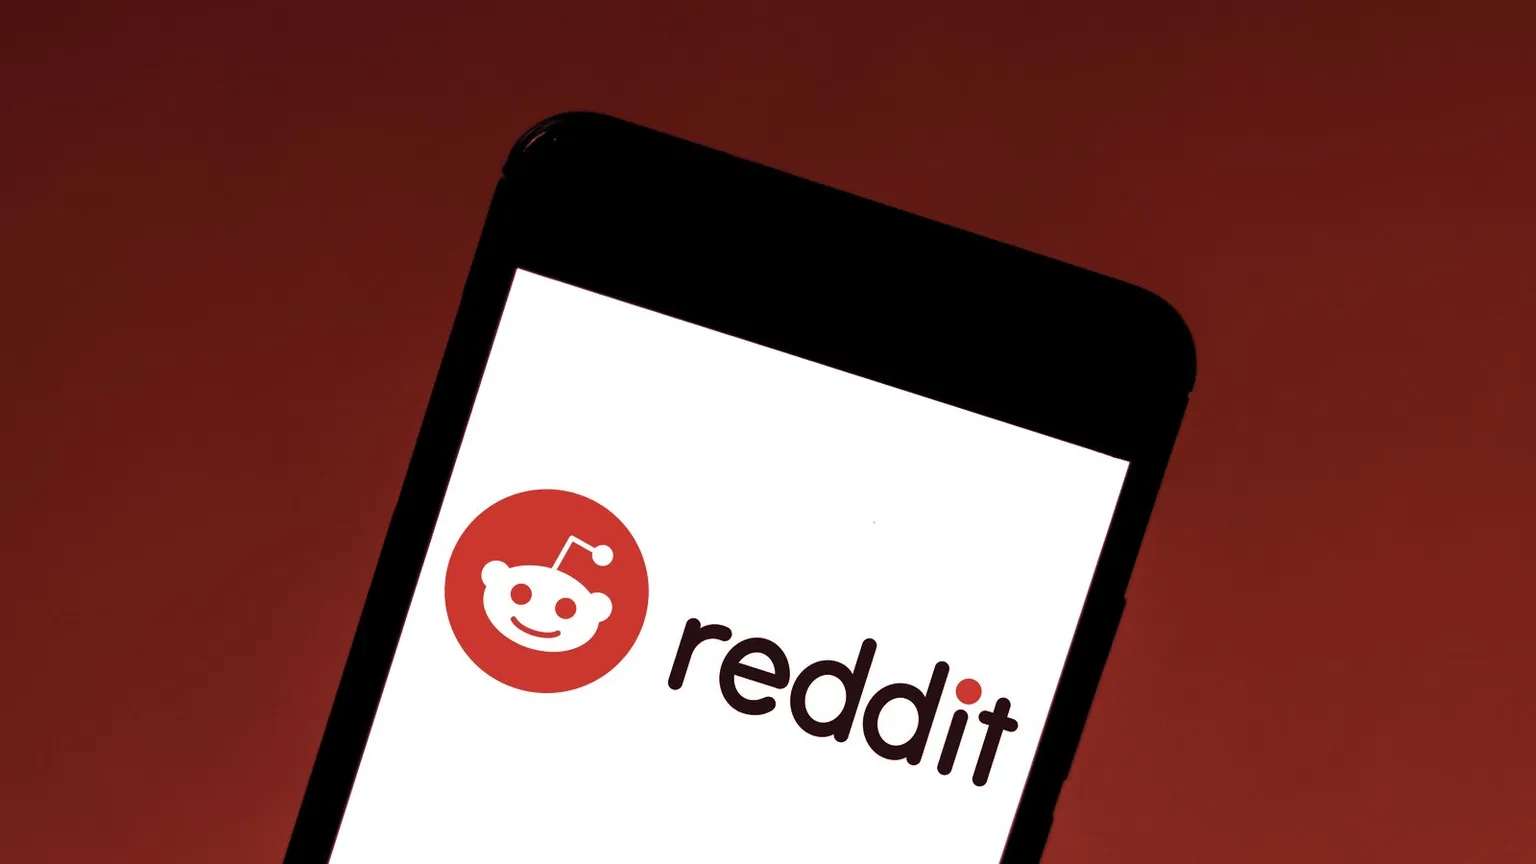 Reddit is the seventh-most-visited site in the US. Image: Shutterstock